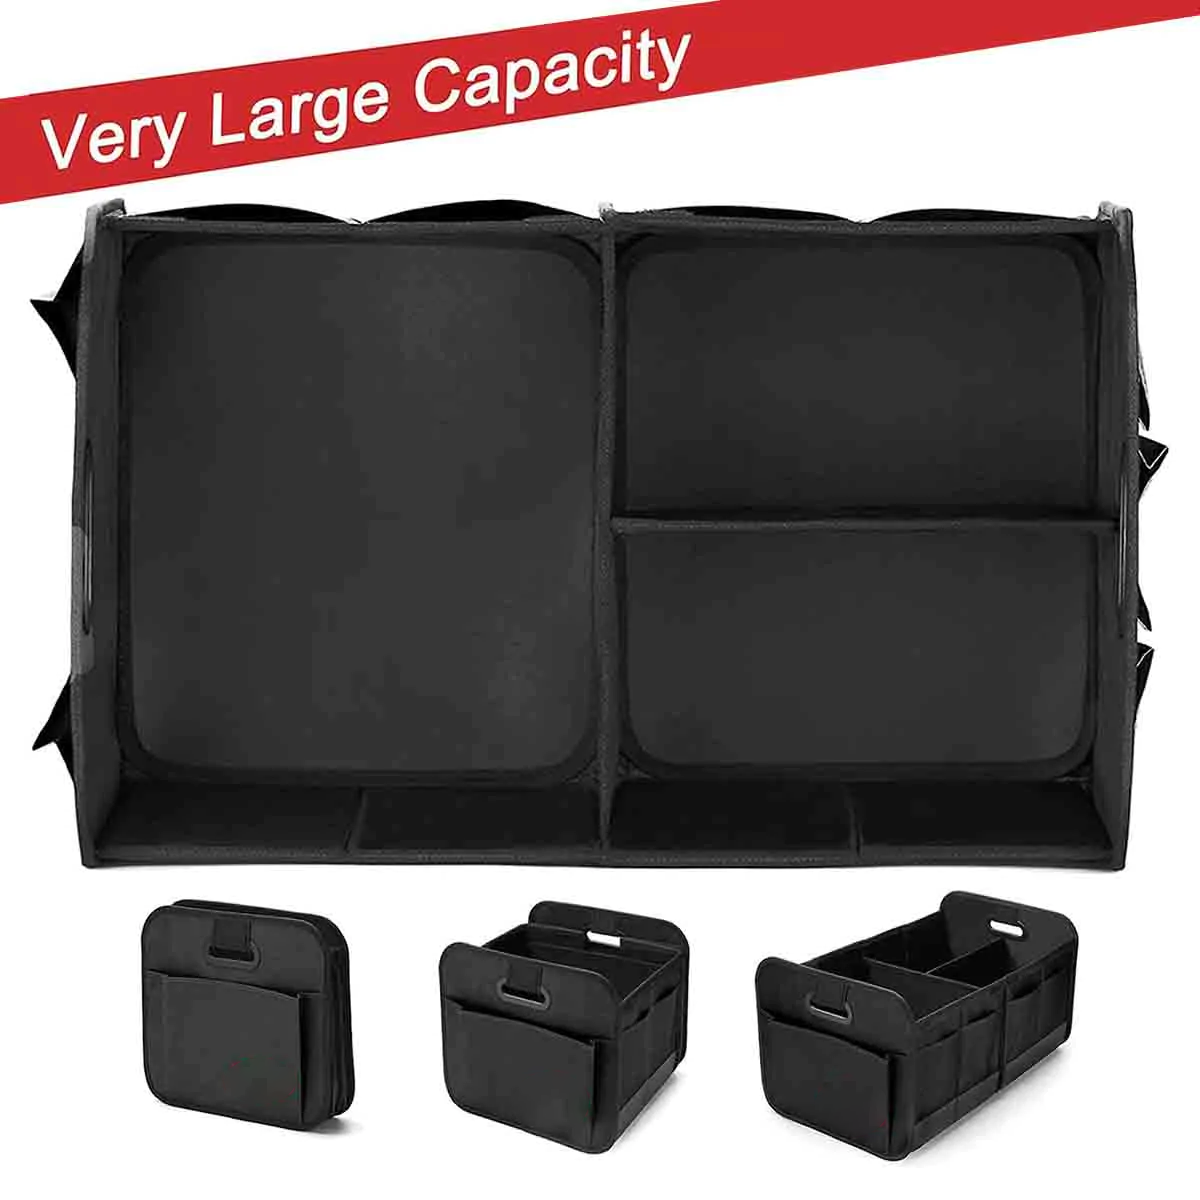 Custom Text For Car Trunk Organizer Storage, Custom Fit For Your Cars, Reinforced Handles, Collapsible Multi, Compartment Car Organizers, Foldable and Waterproof, 600D Oxford Polyester AC12995